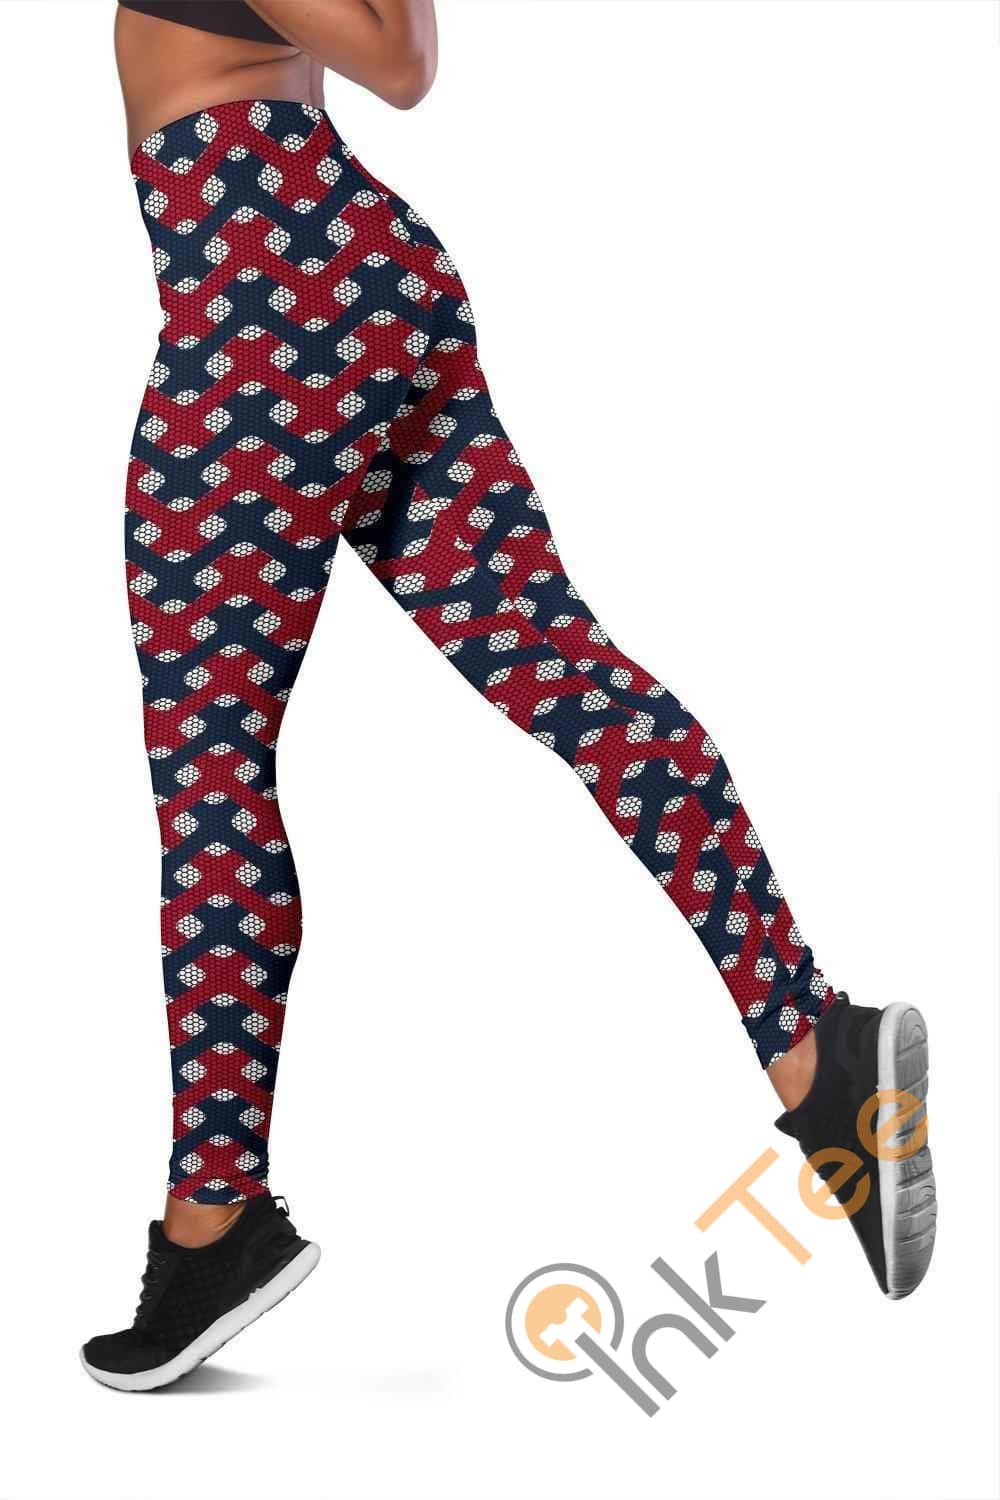 Inktee Store - Ole Miss Rebels Inspired 3D All Over Print For Yoga Fitness Fashion Women'S Leggings Image